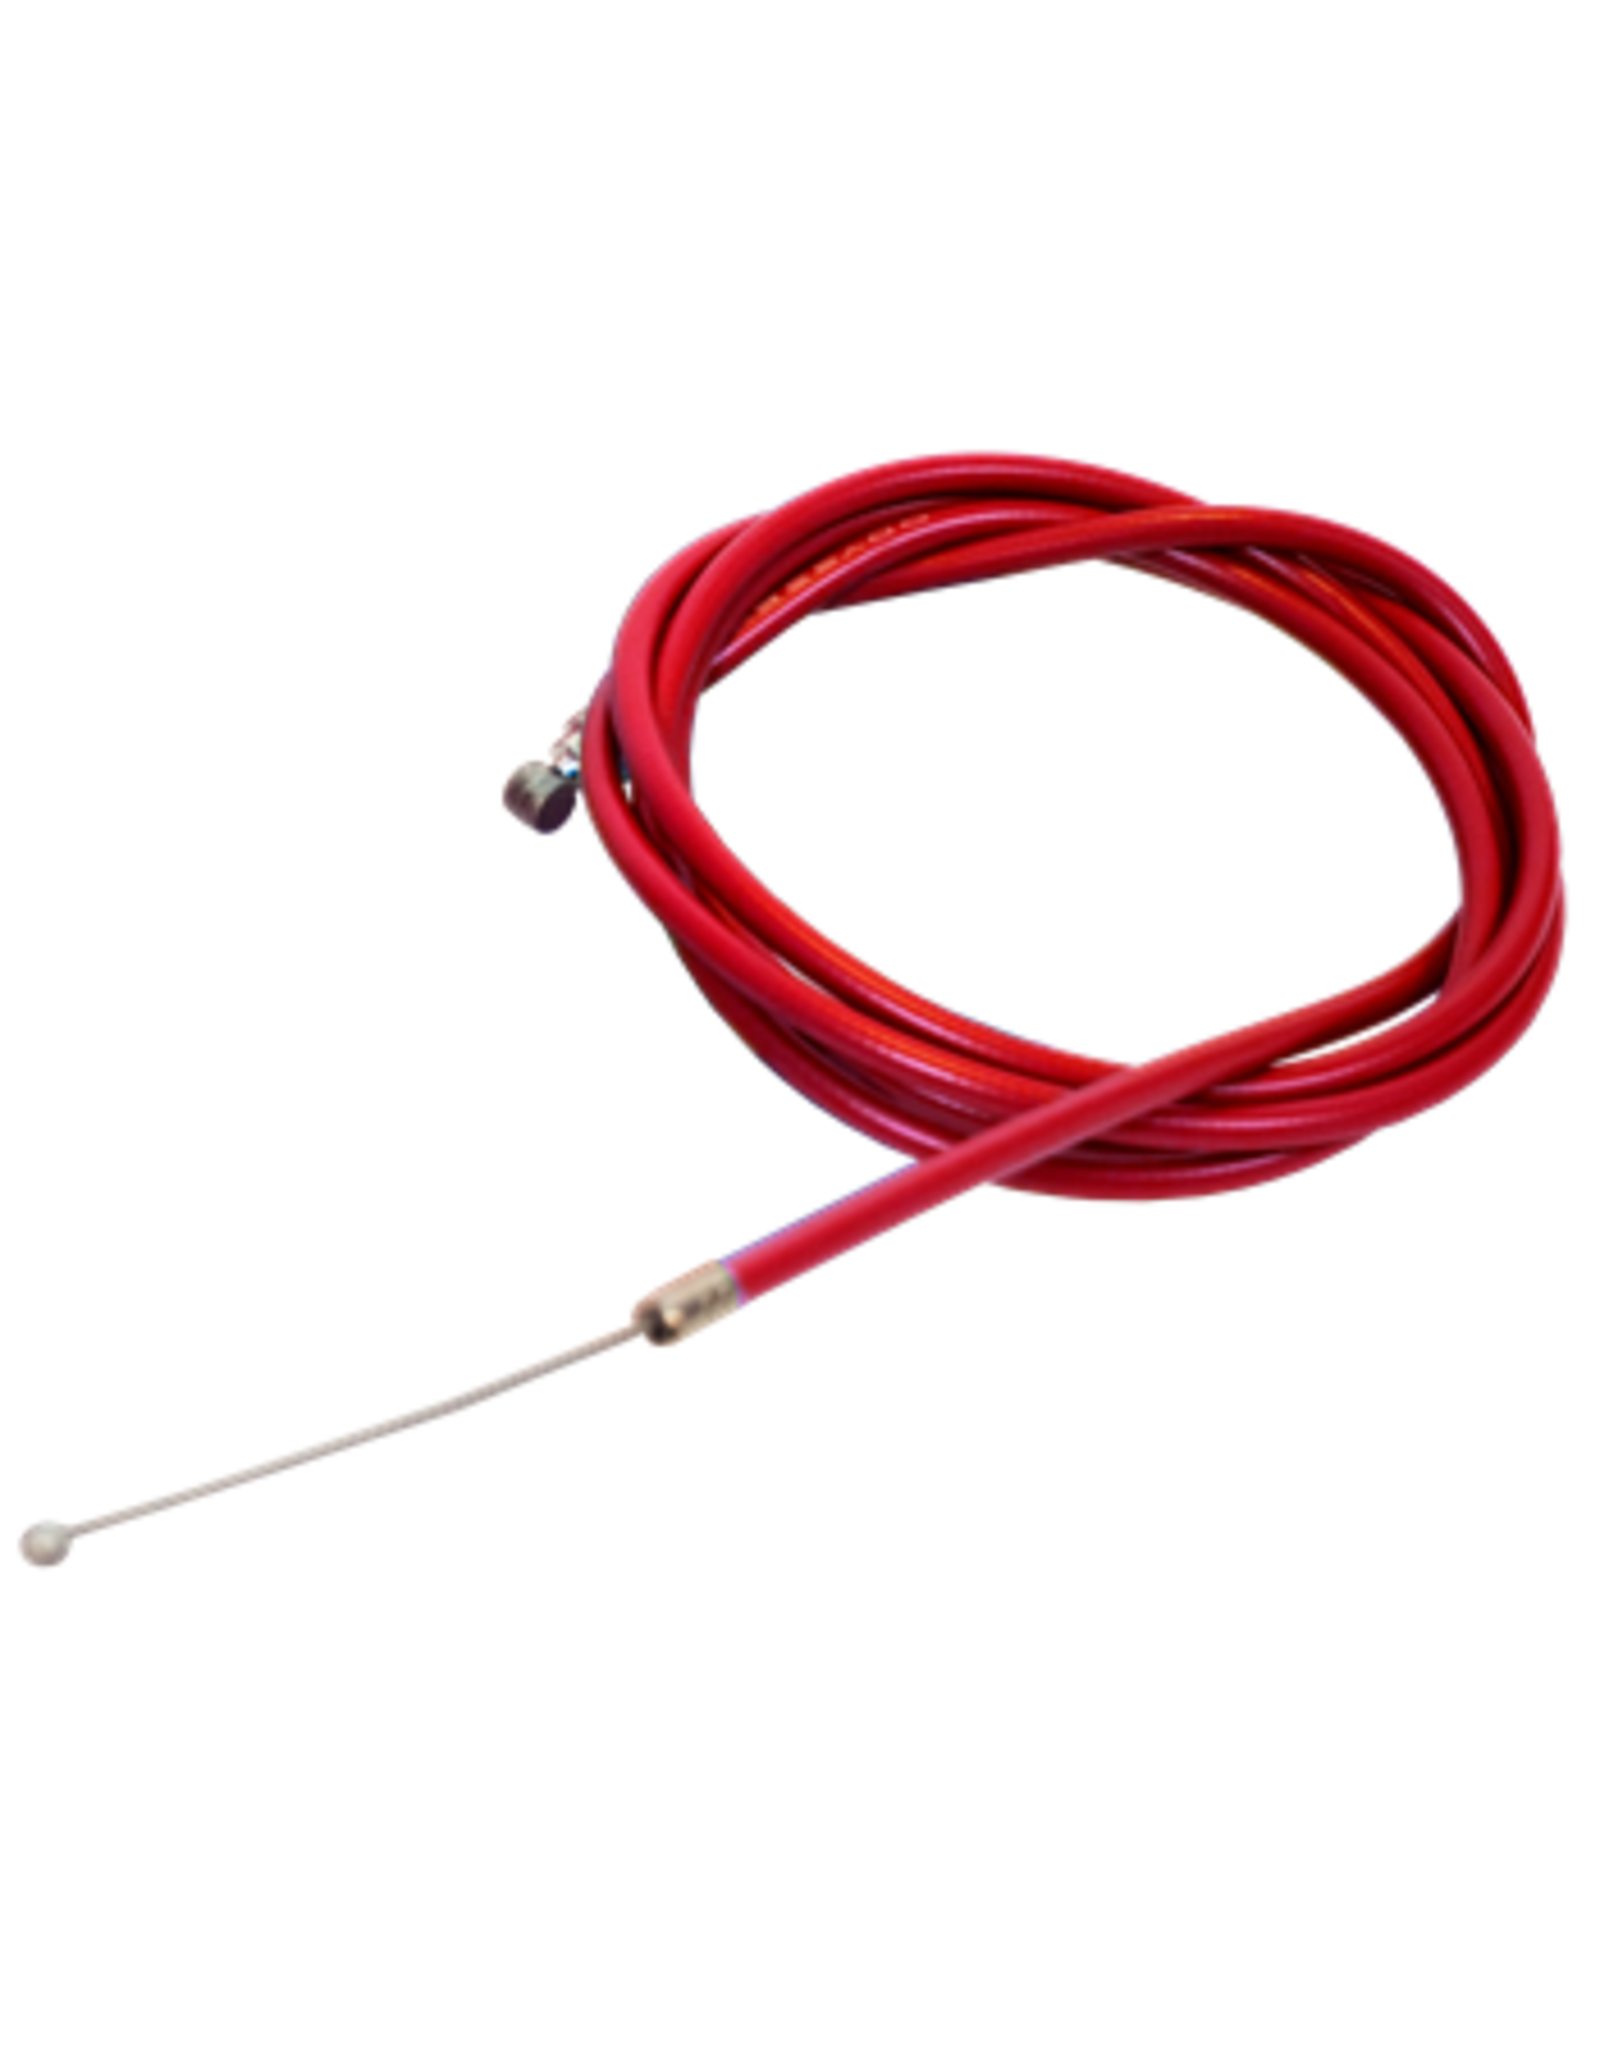 Odyssey ODYSSEY SLIC KABLE RED BRAKE CABLE